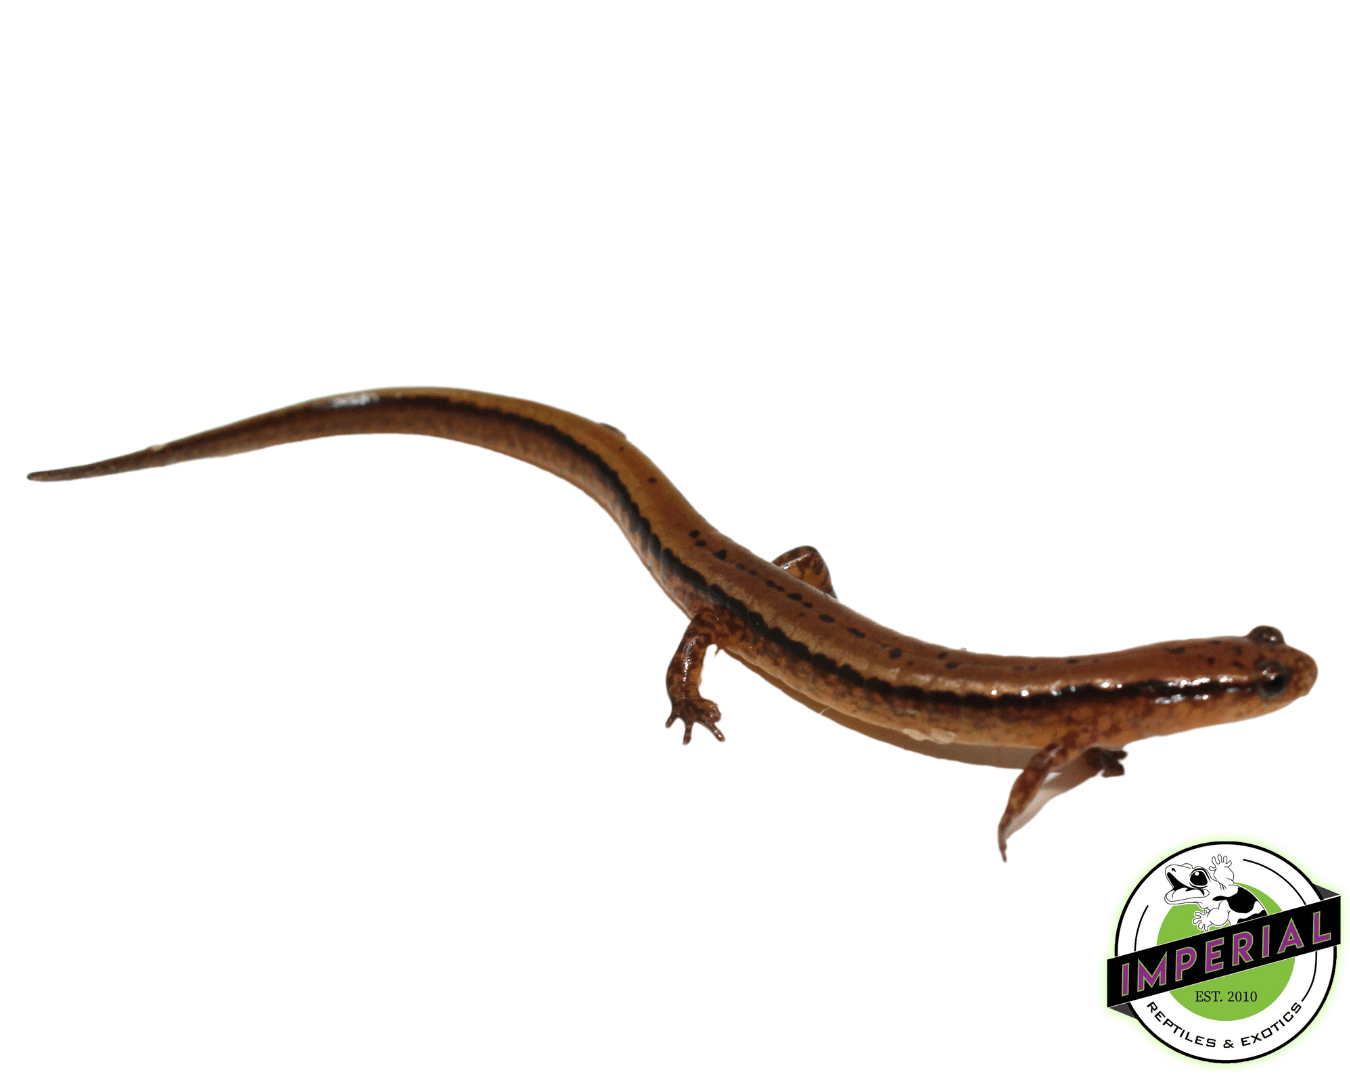 For Lined Two REPTILES Reptiles Imperial Salamander – & - EXOTICS IMPERIAL Sale